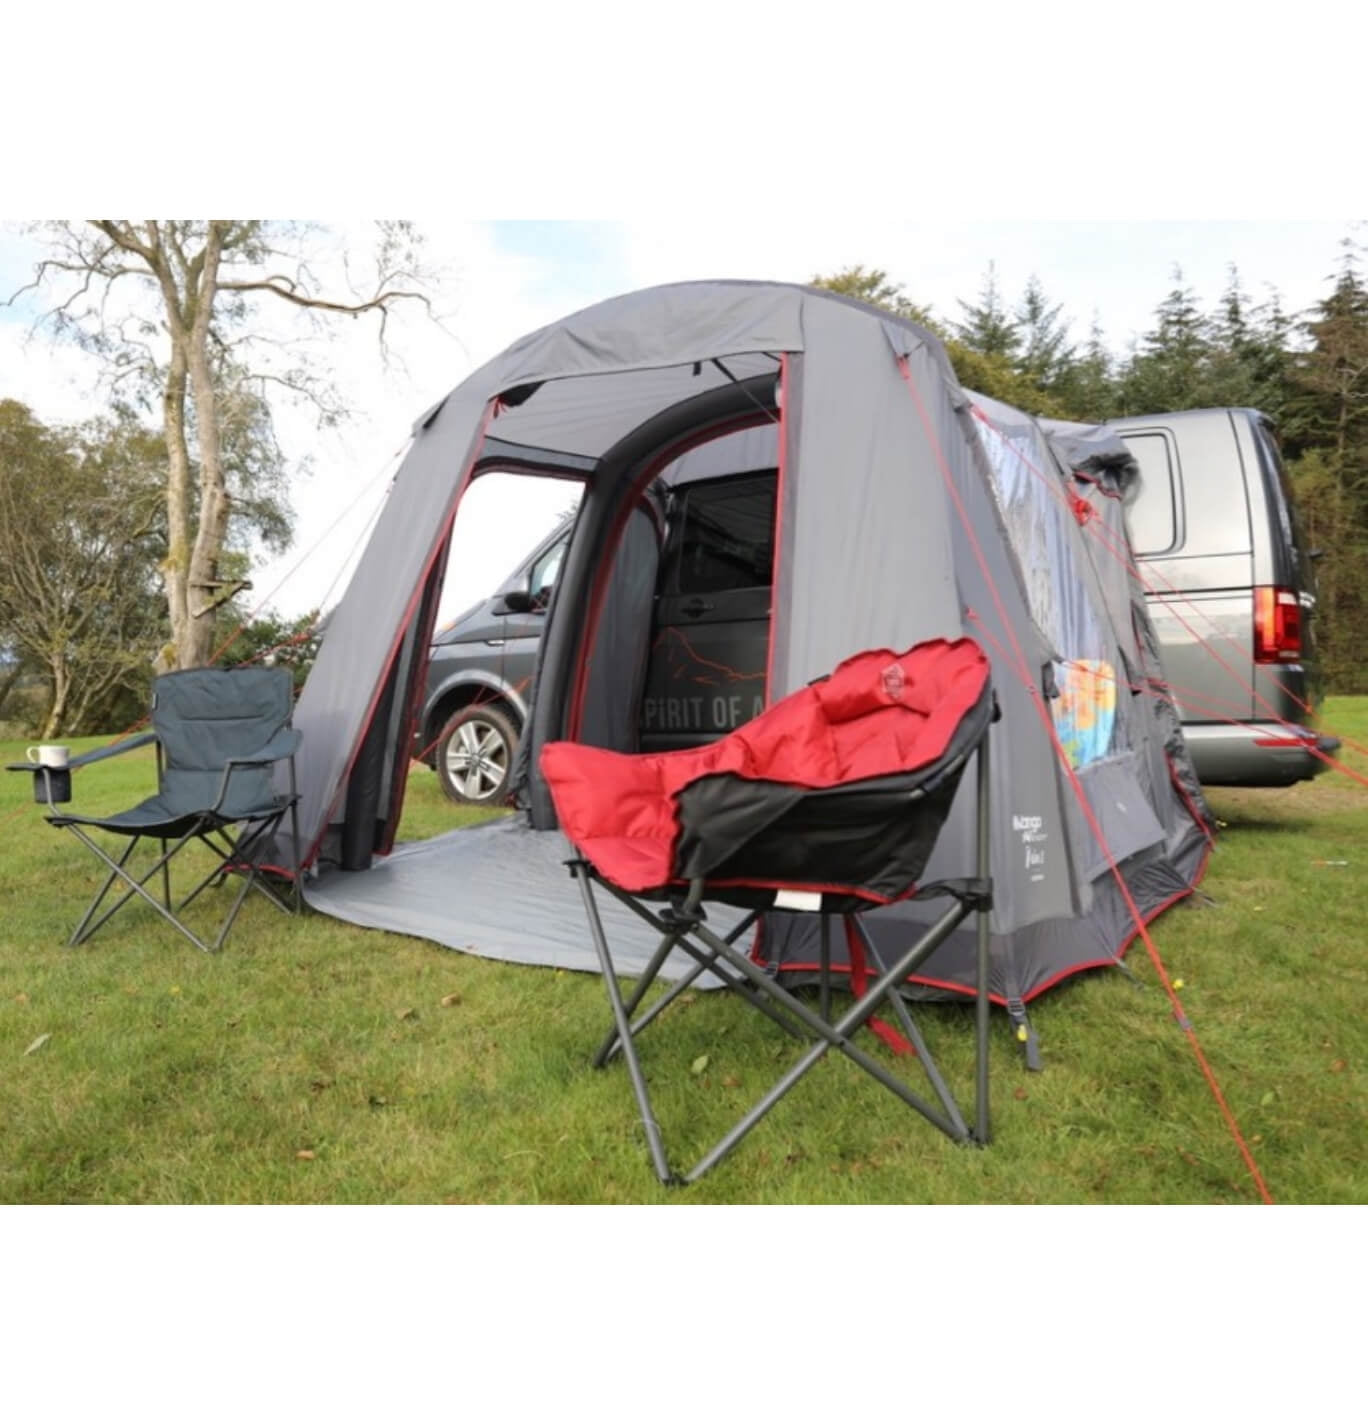 Vango Faros pitched with camping furnitute set up outside